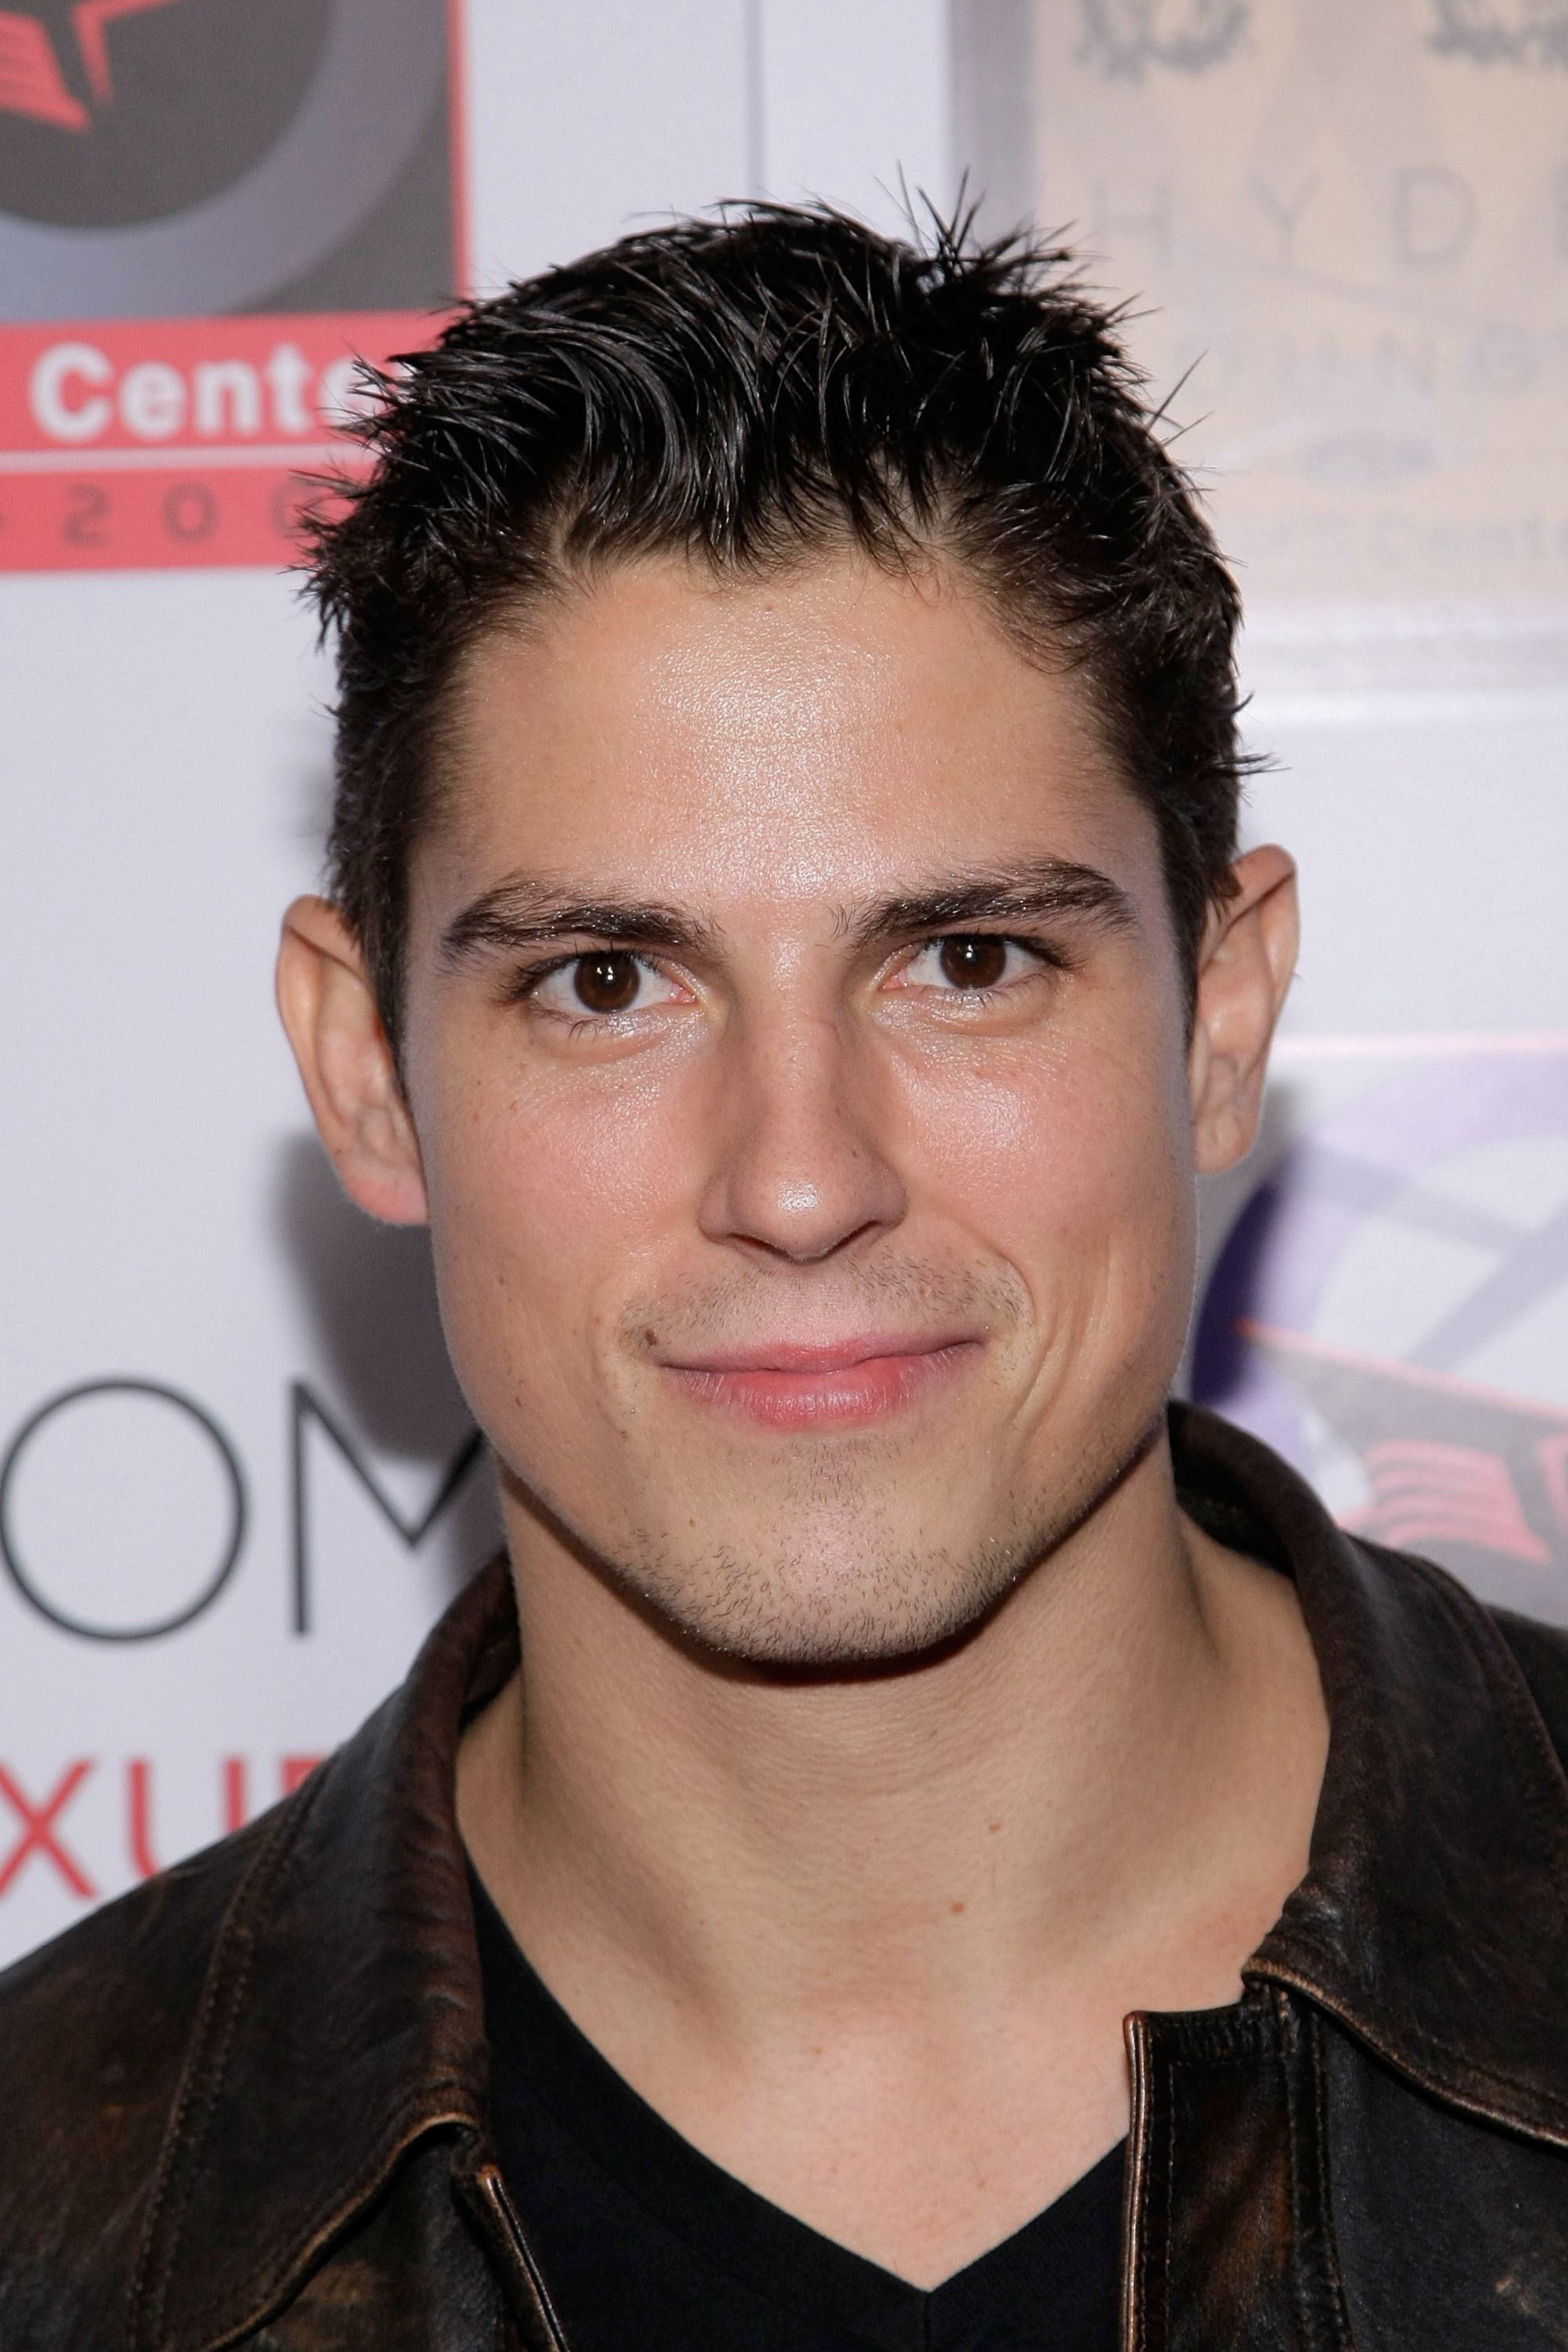 Sean Faris poses at the launch of the Hyde Lounge on November 6, 2009